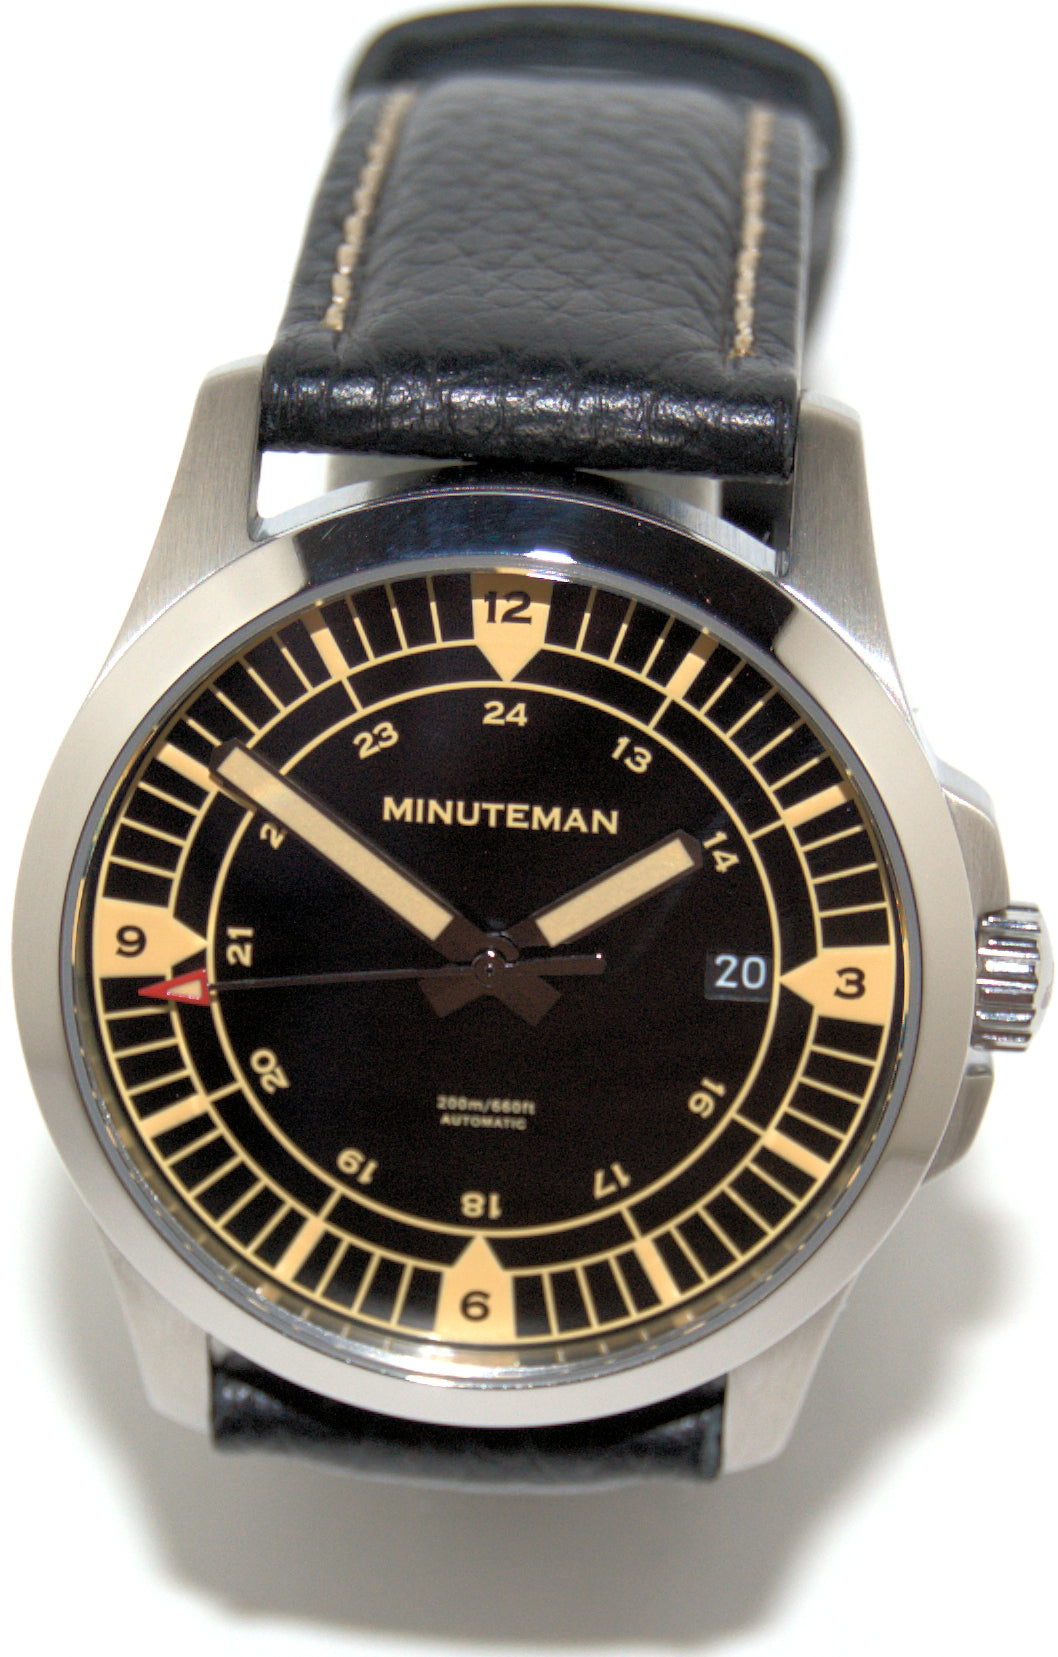 Minuteman Darby brushed finish leather strap wristwatch